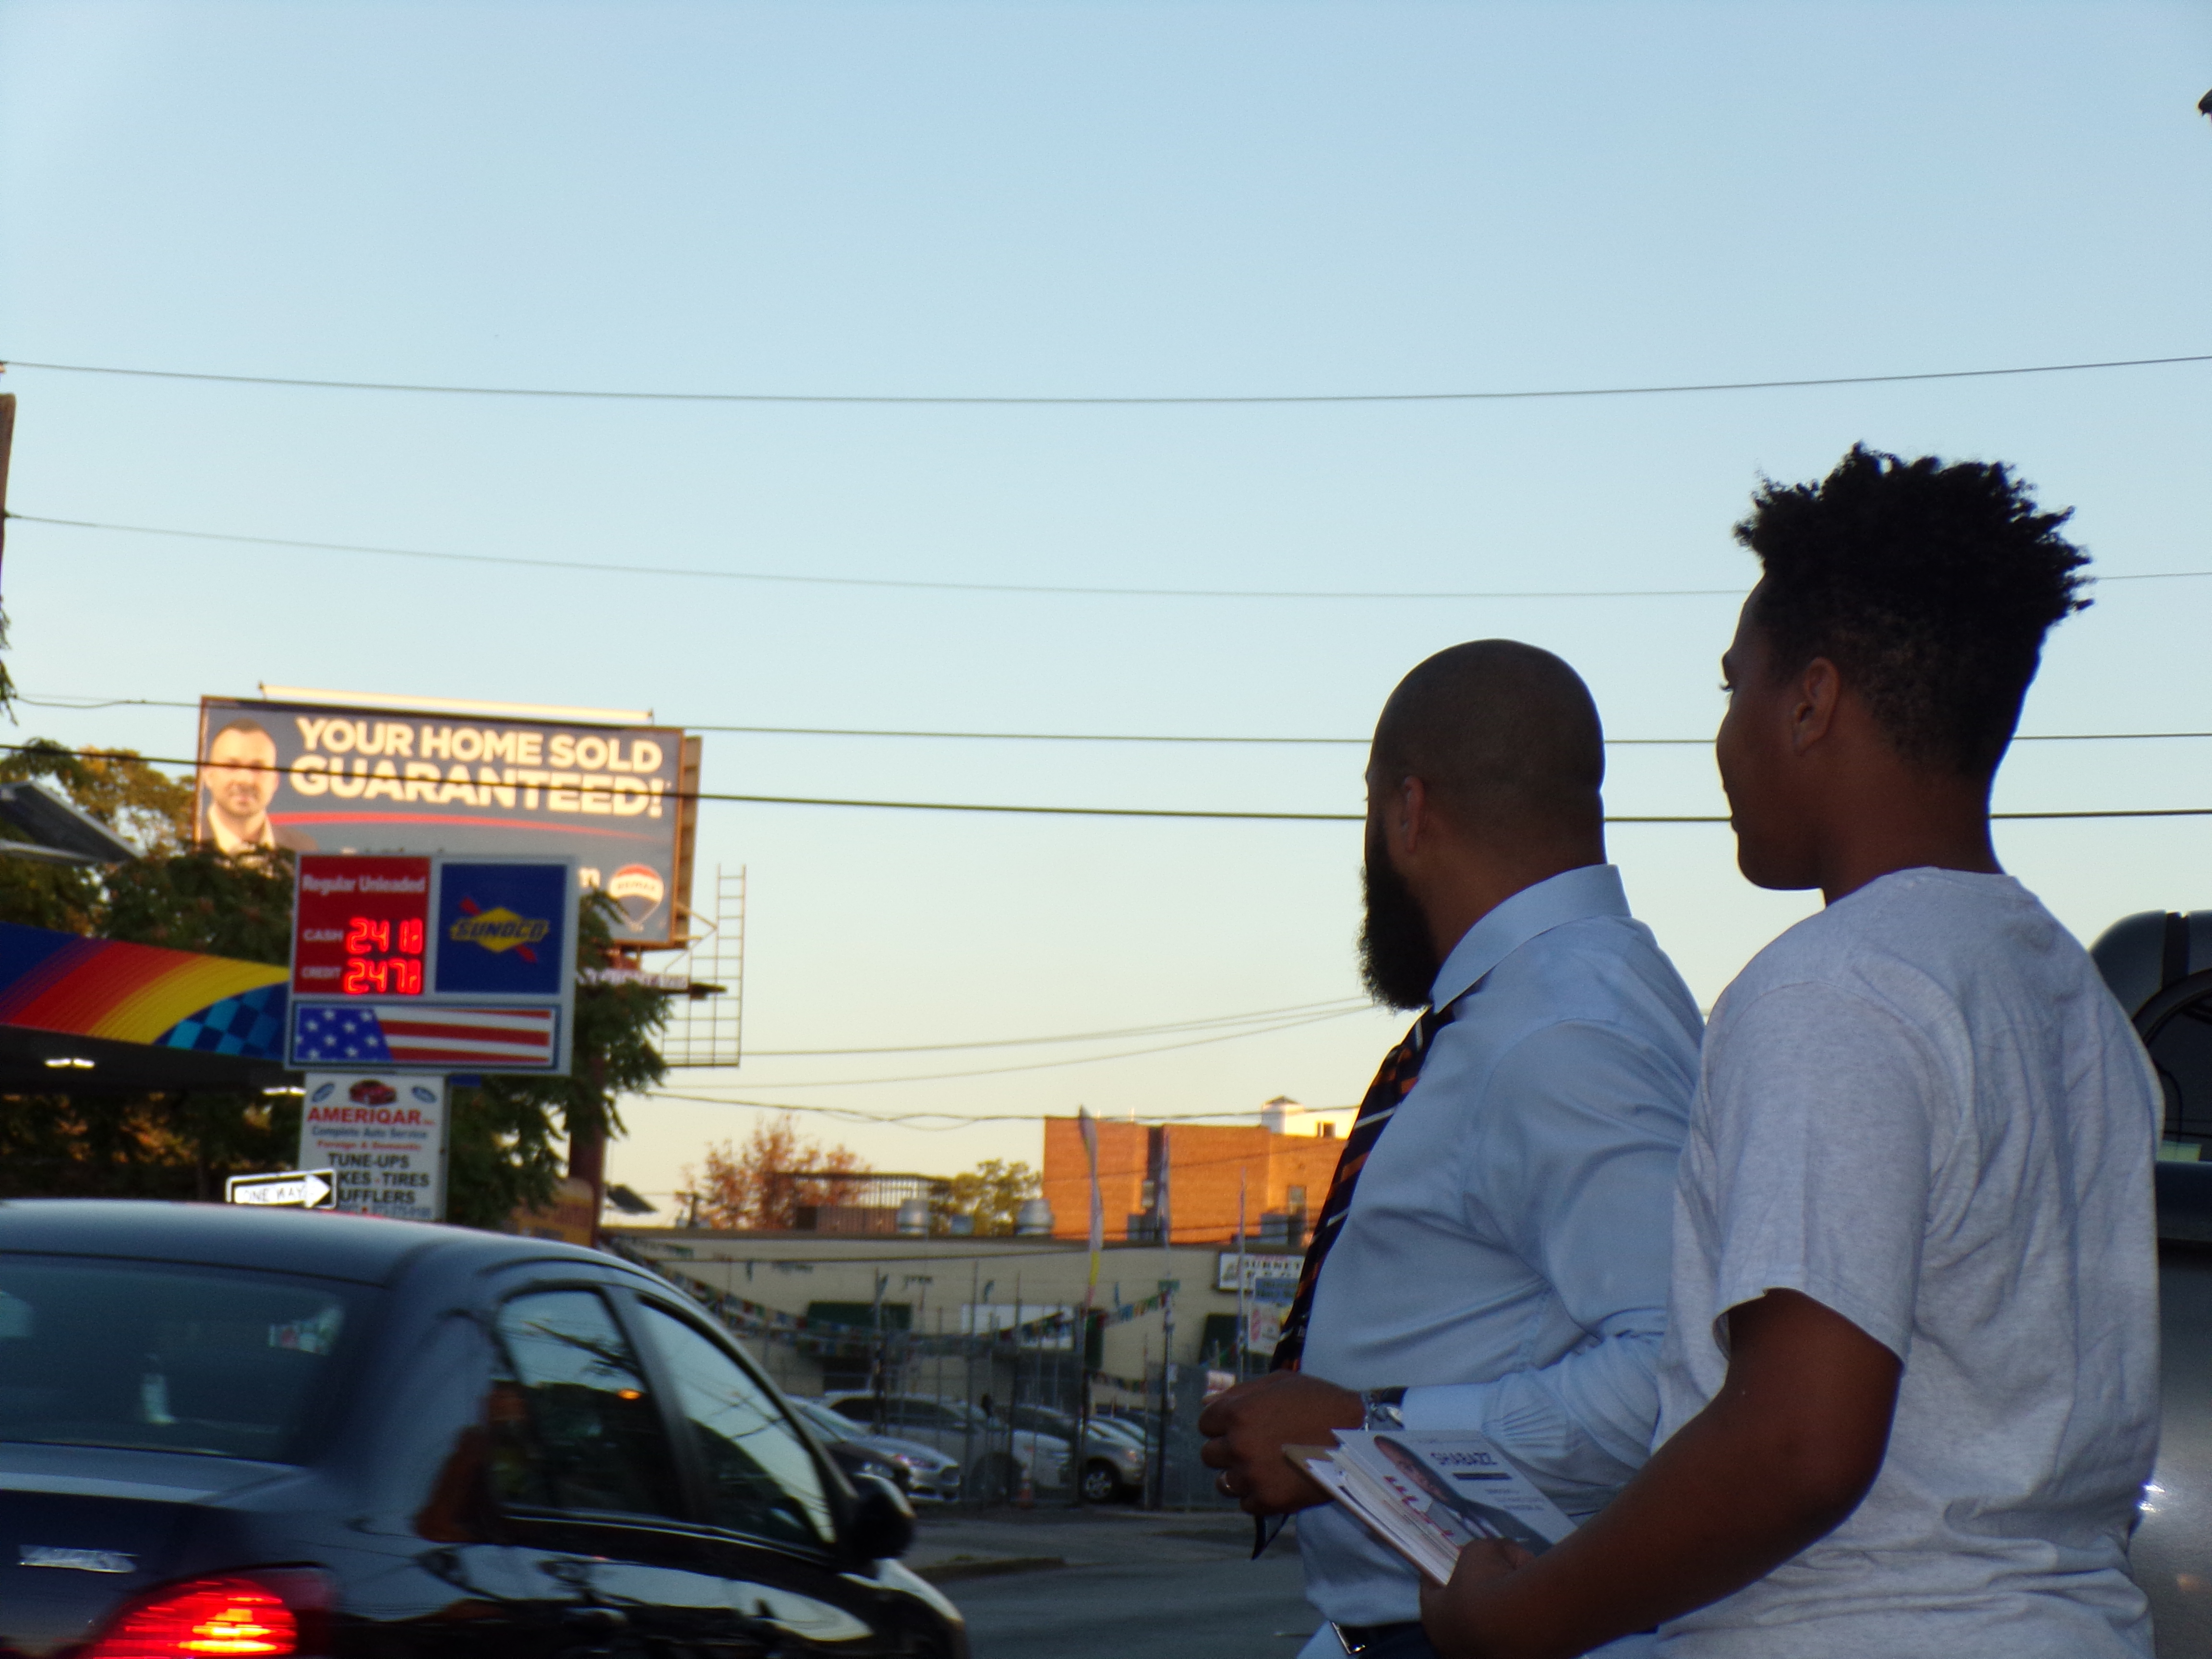 Father and son Shabazz in Irvington.